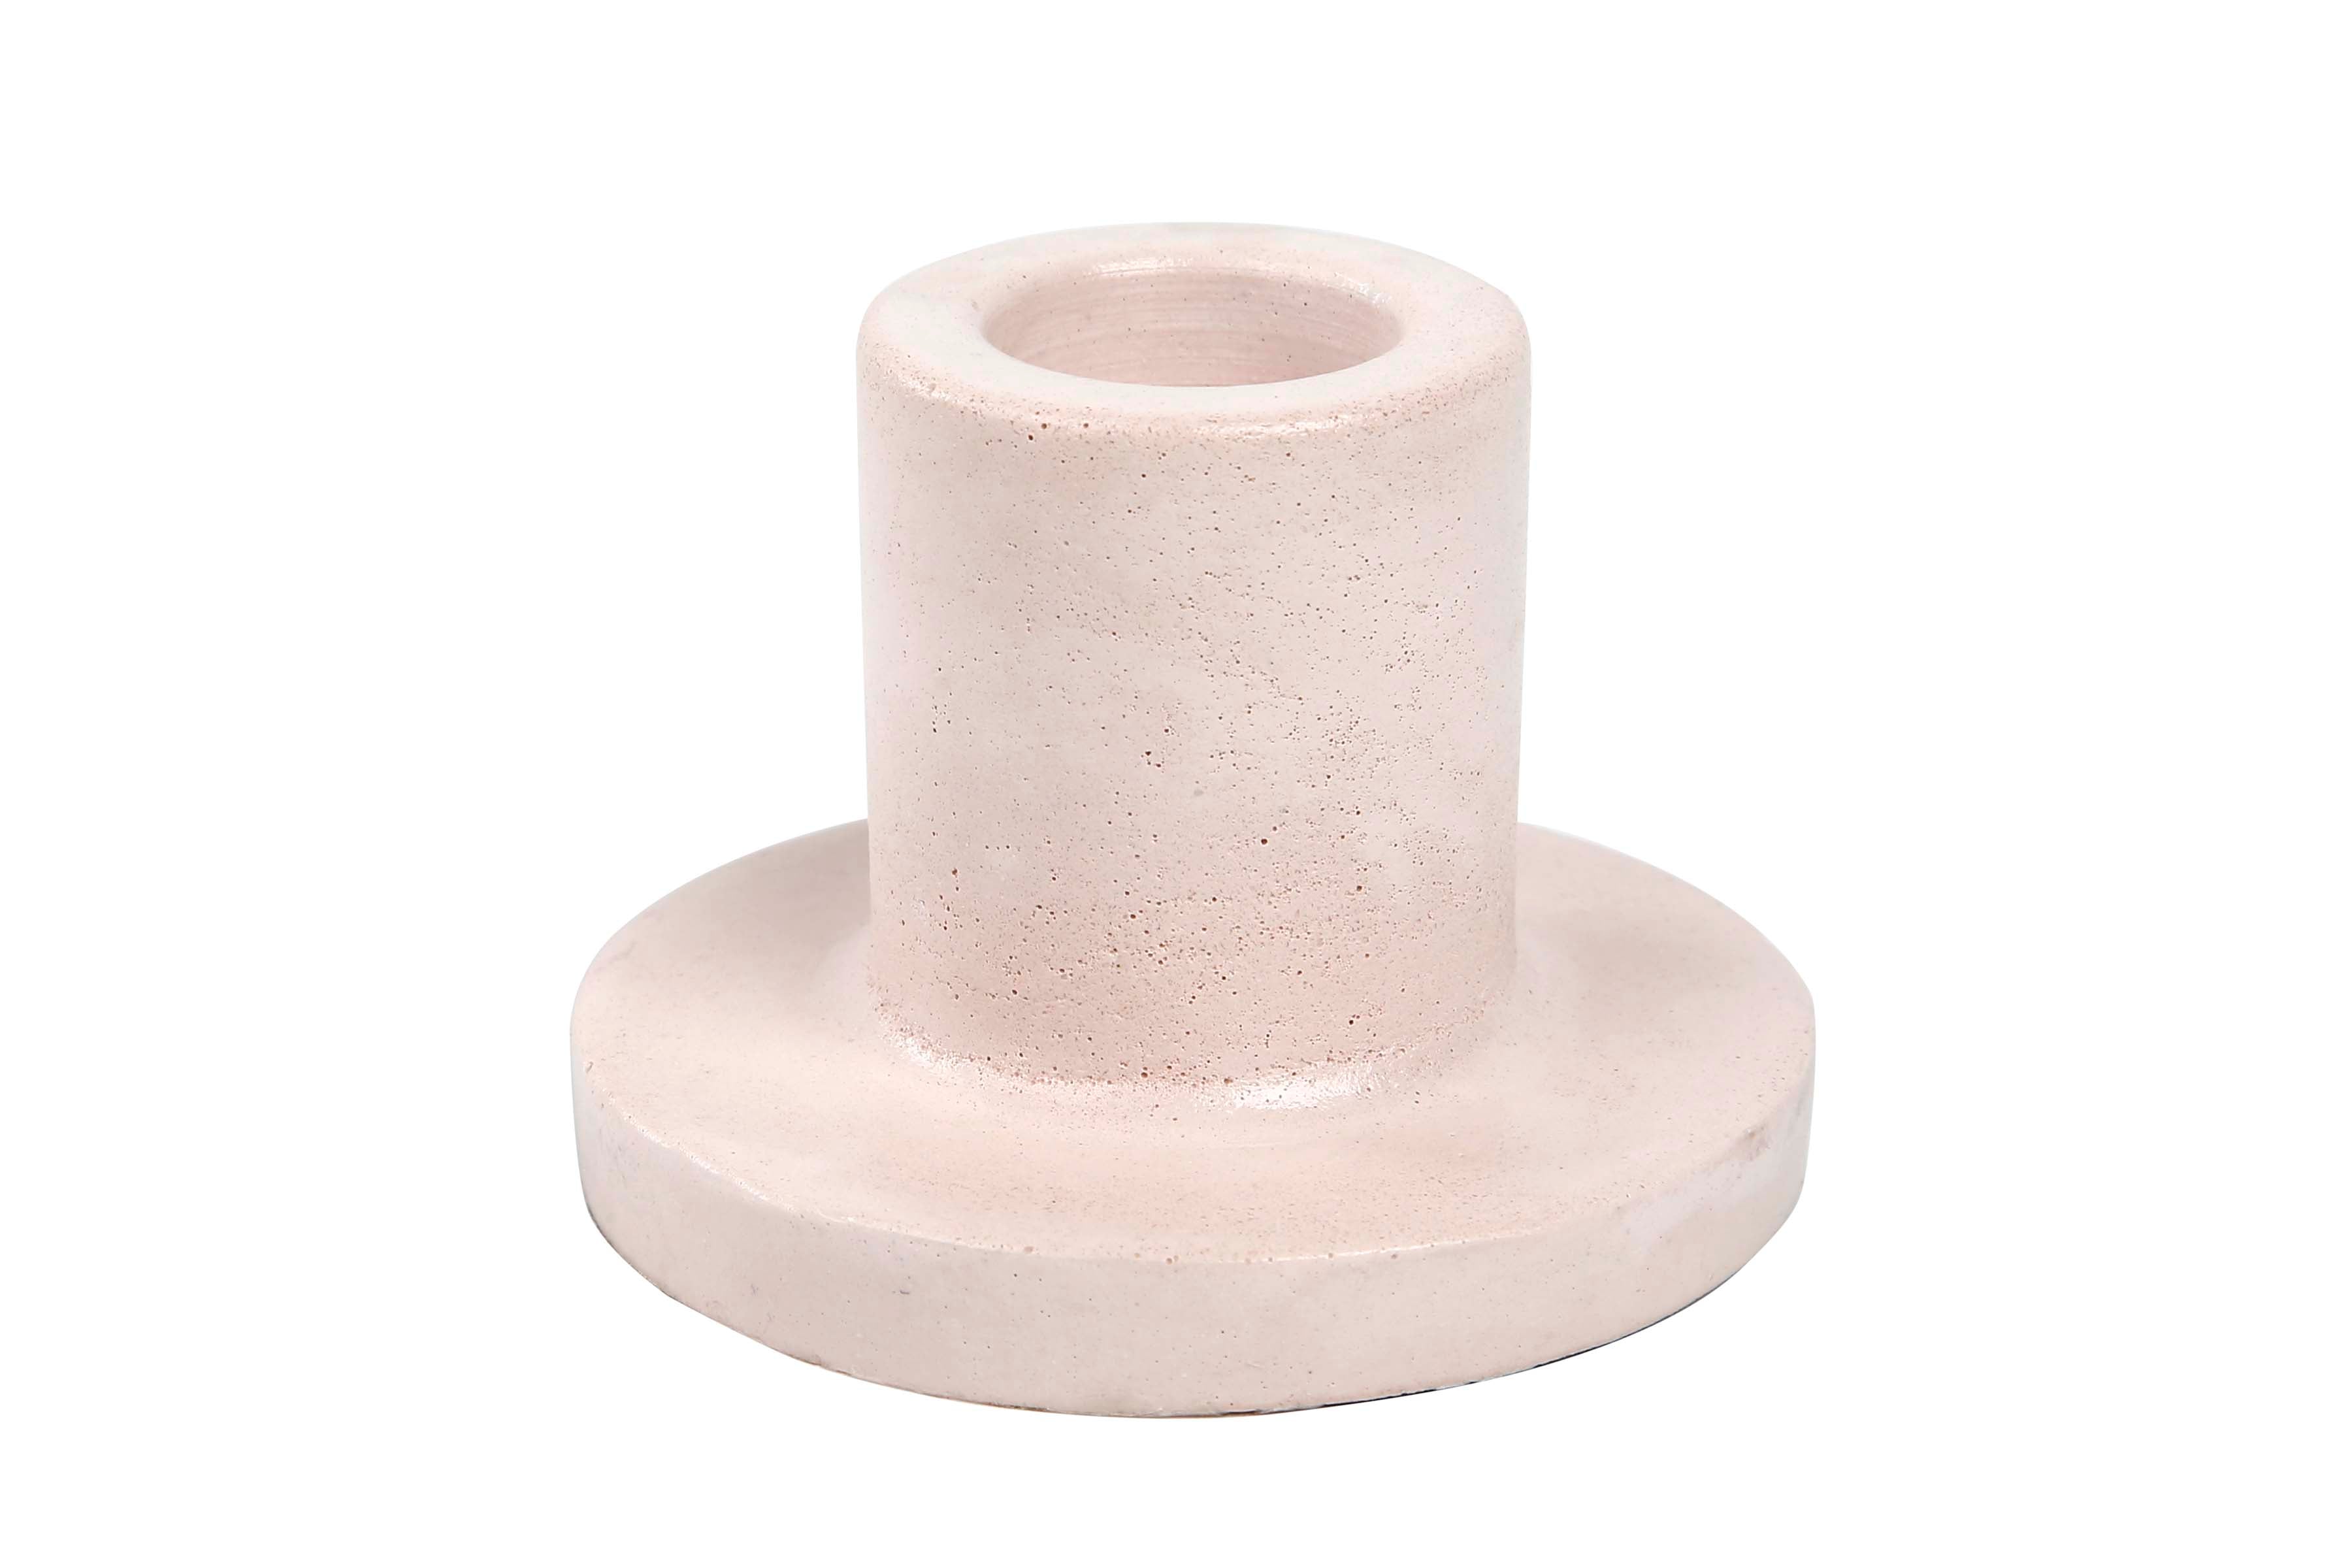 Minimalist Style Concrete Candle Holder - Off White, 2x2.5Inch